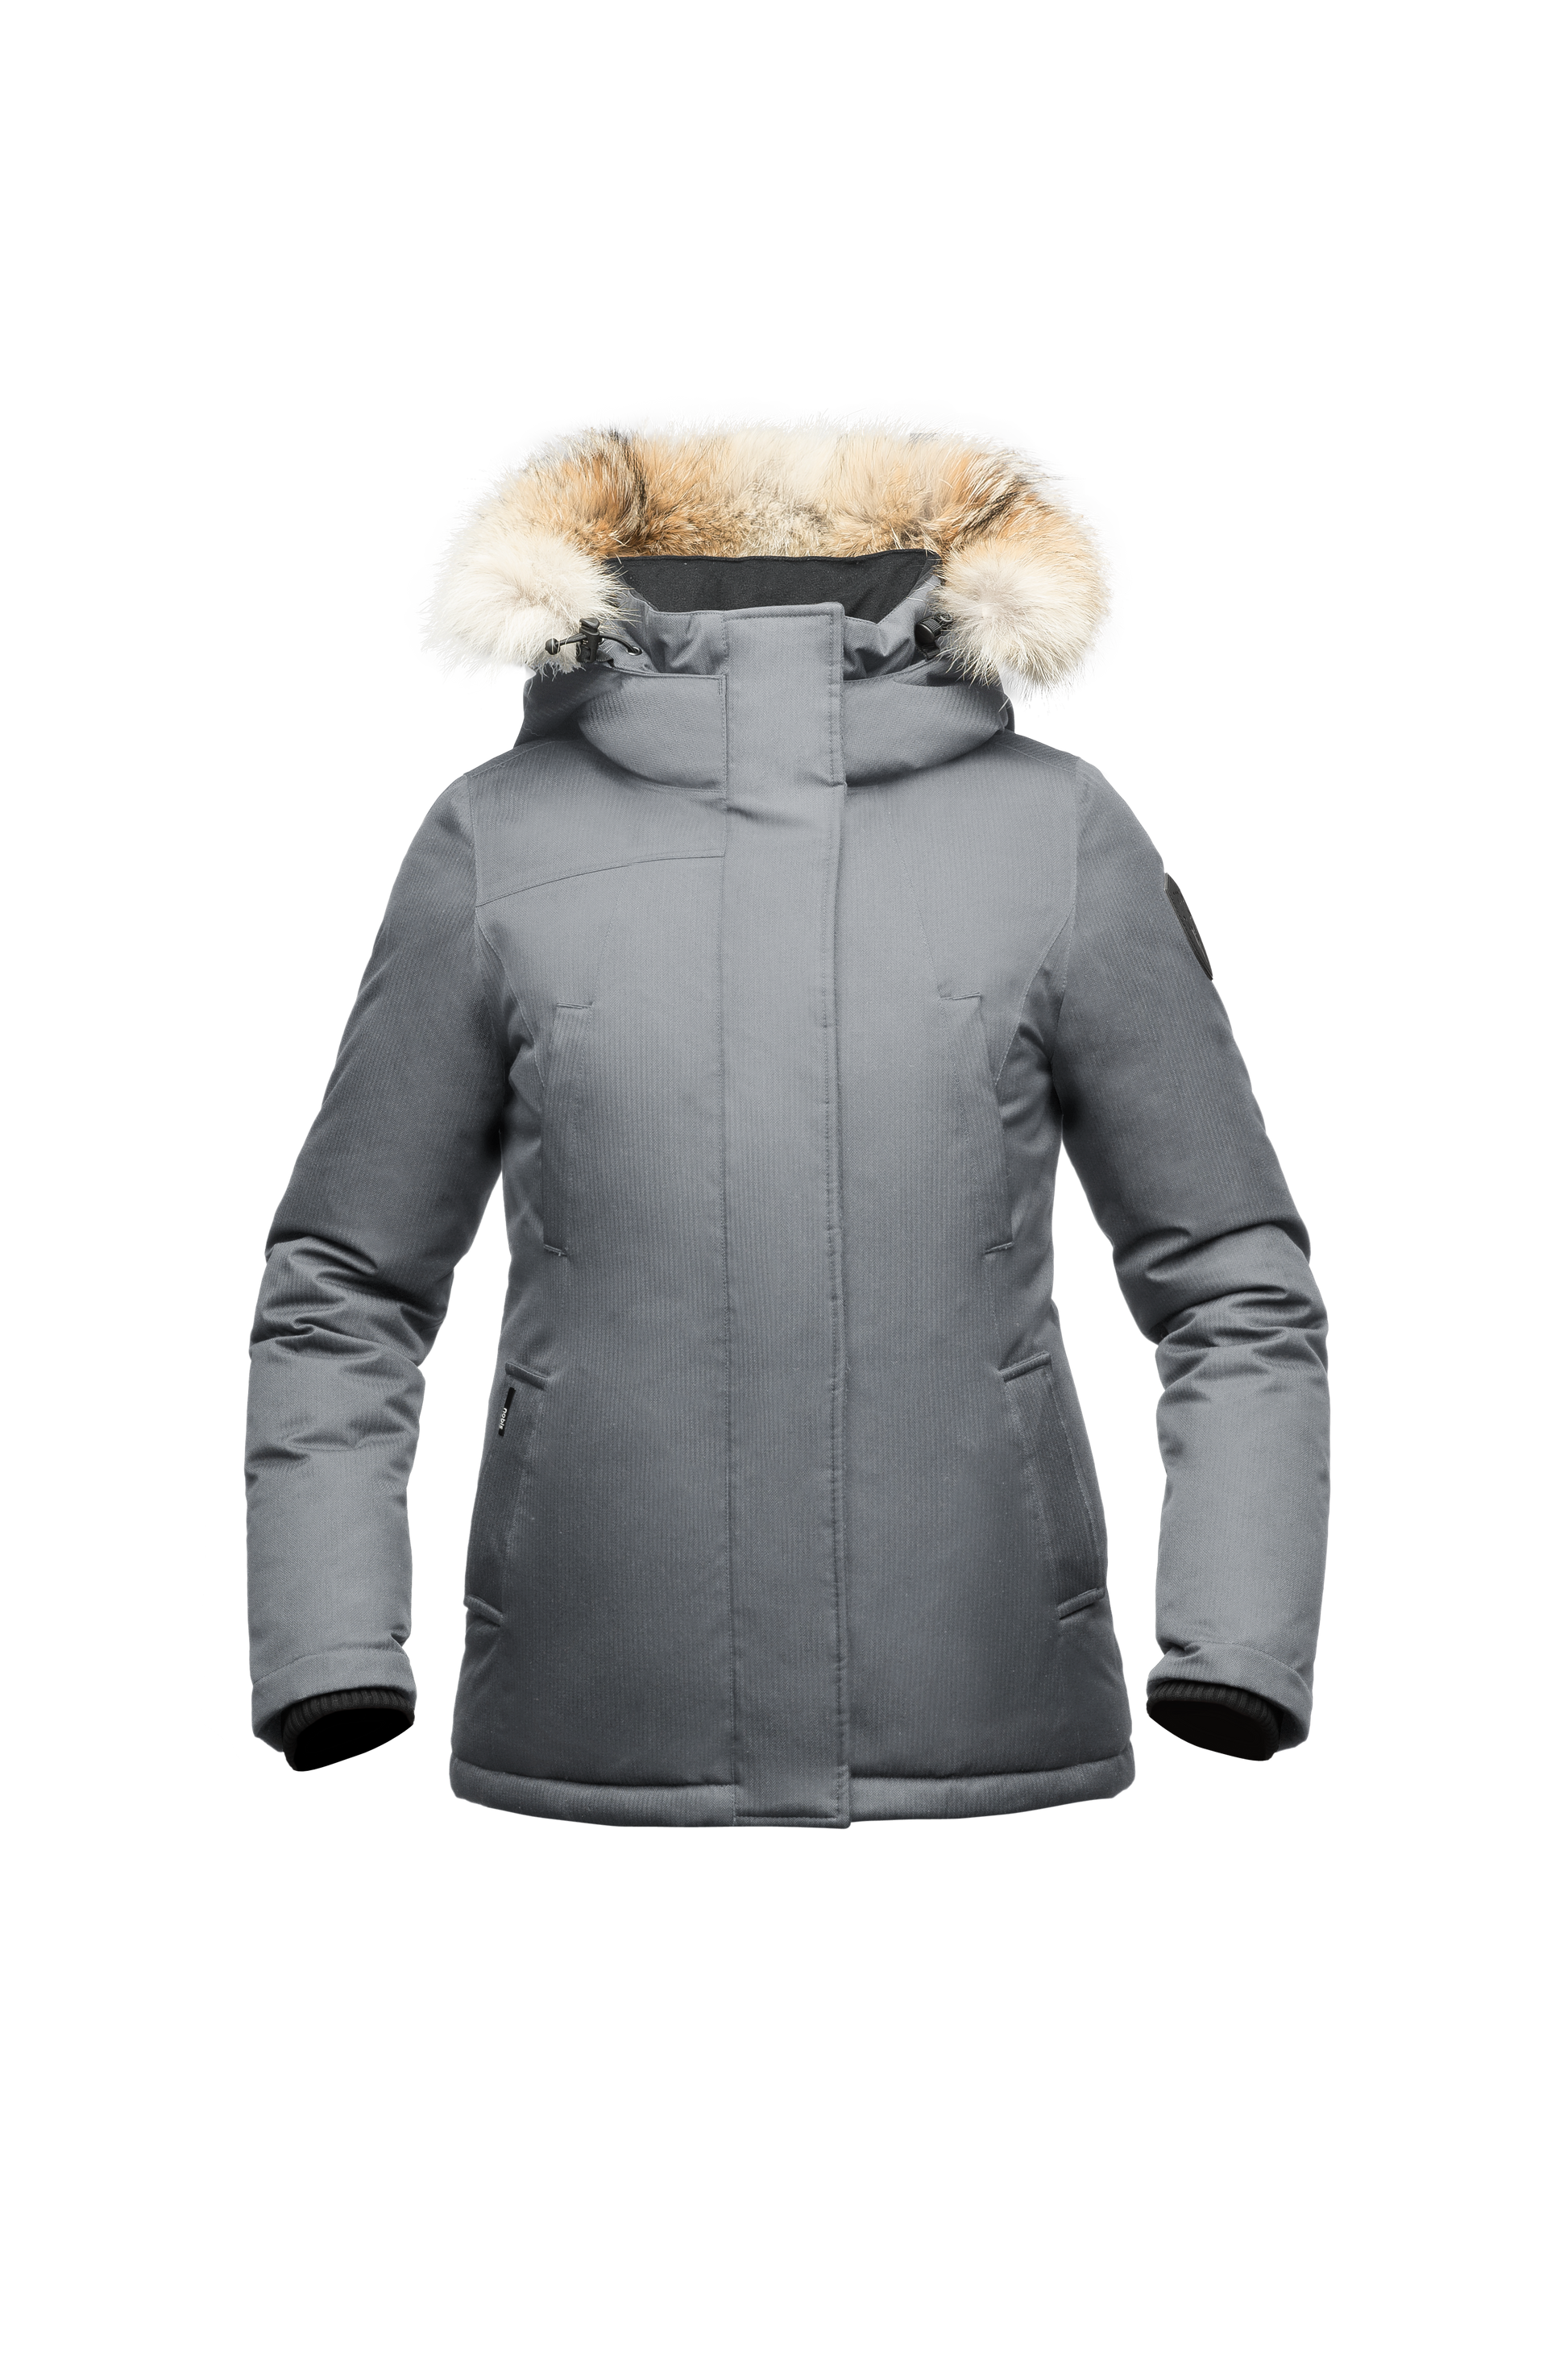 Women's hip length down filled parka in CH Concrete